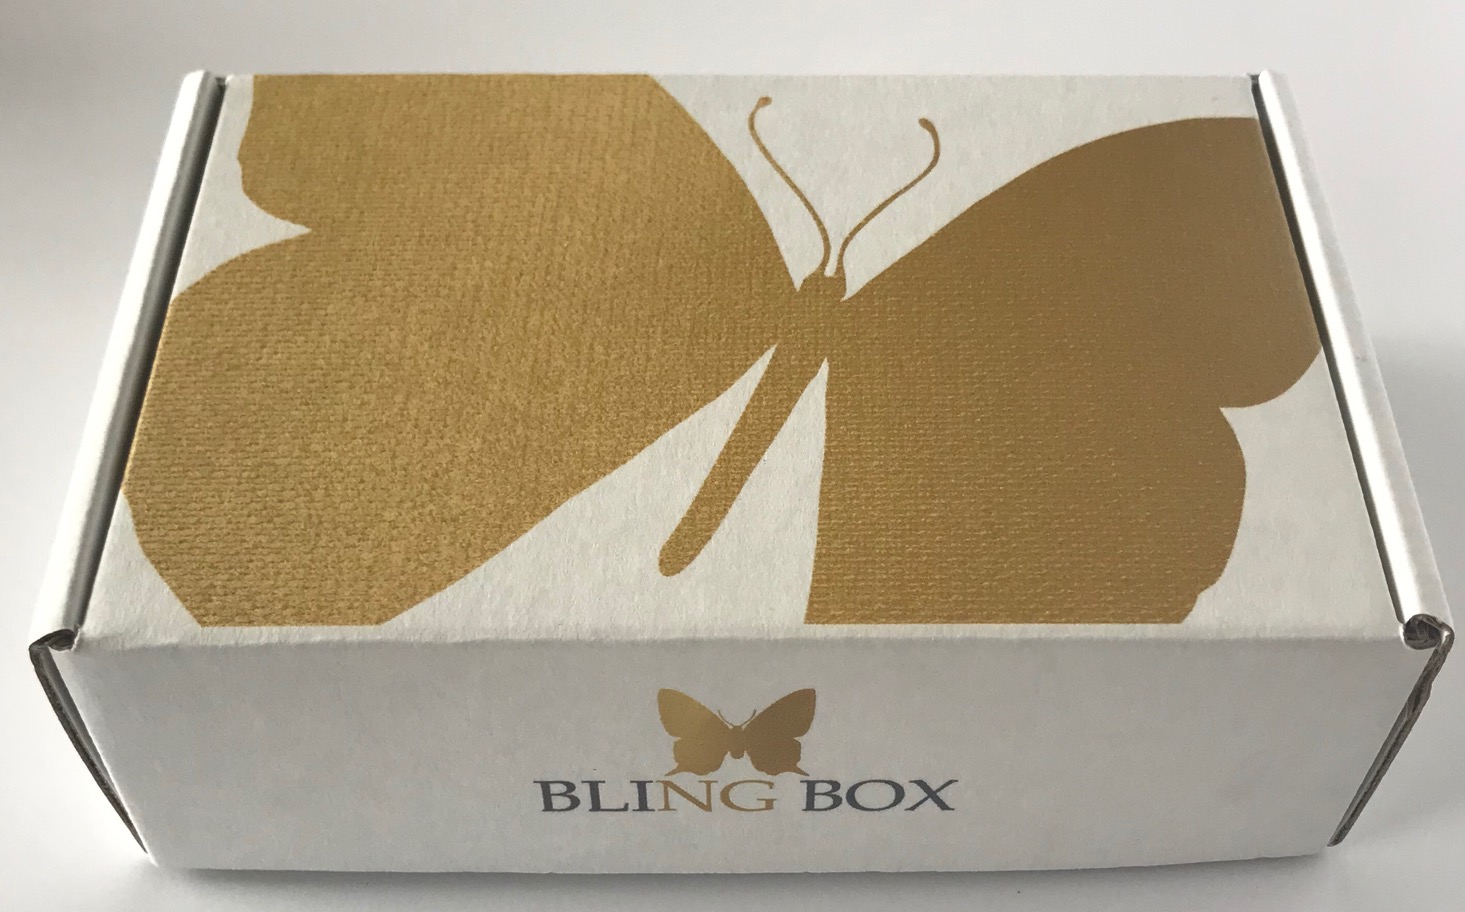 Bling Box Jewelry Subscription Review – March 2018